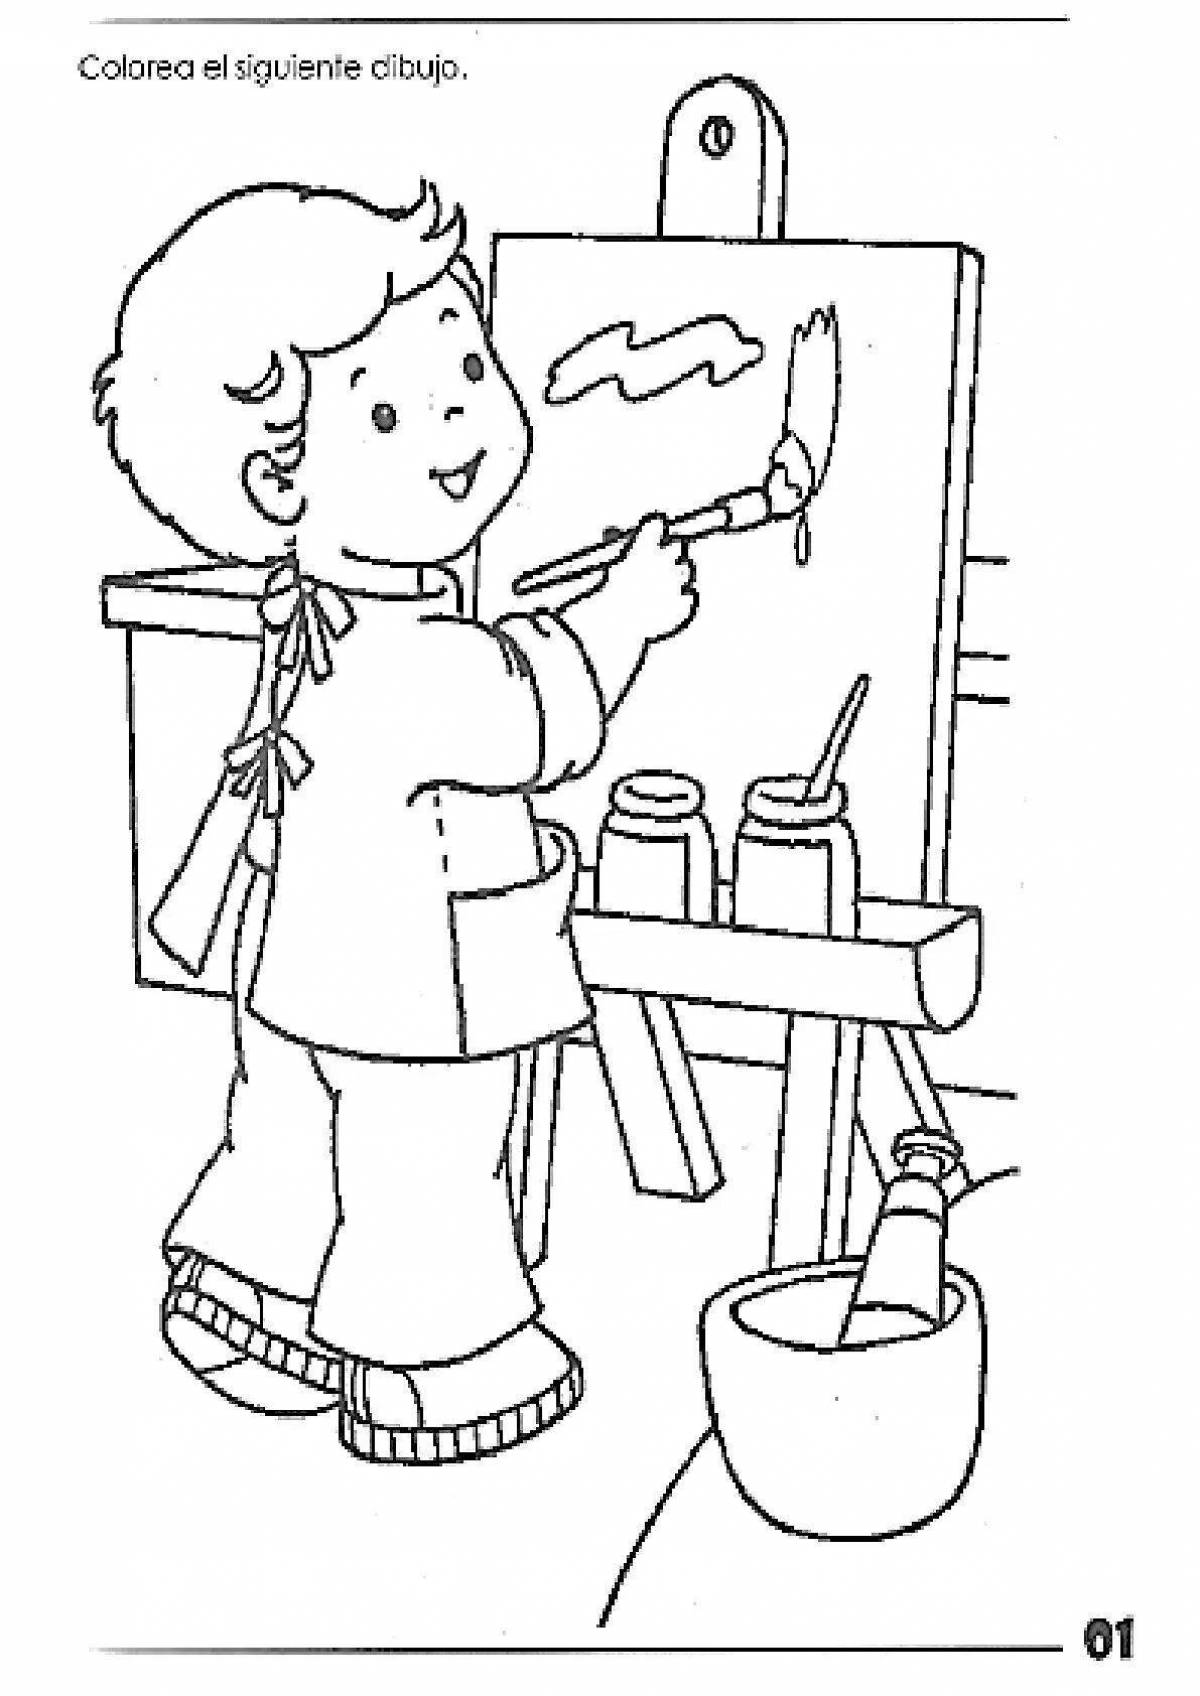 Colorful cashier coloring page